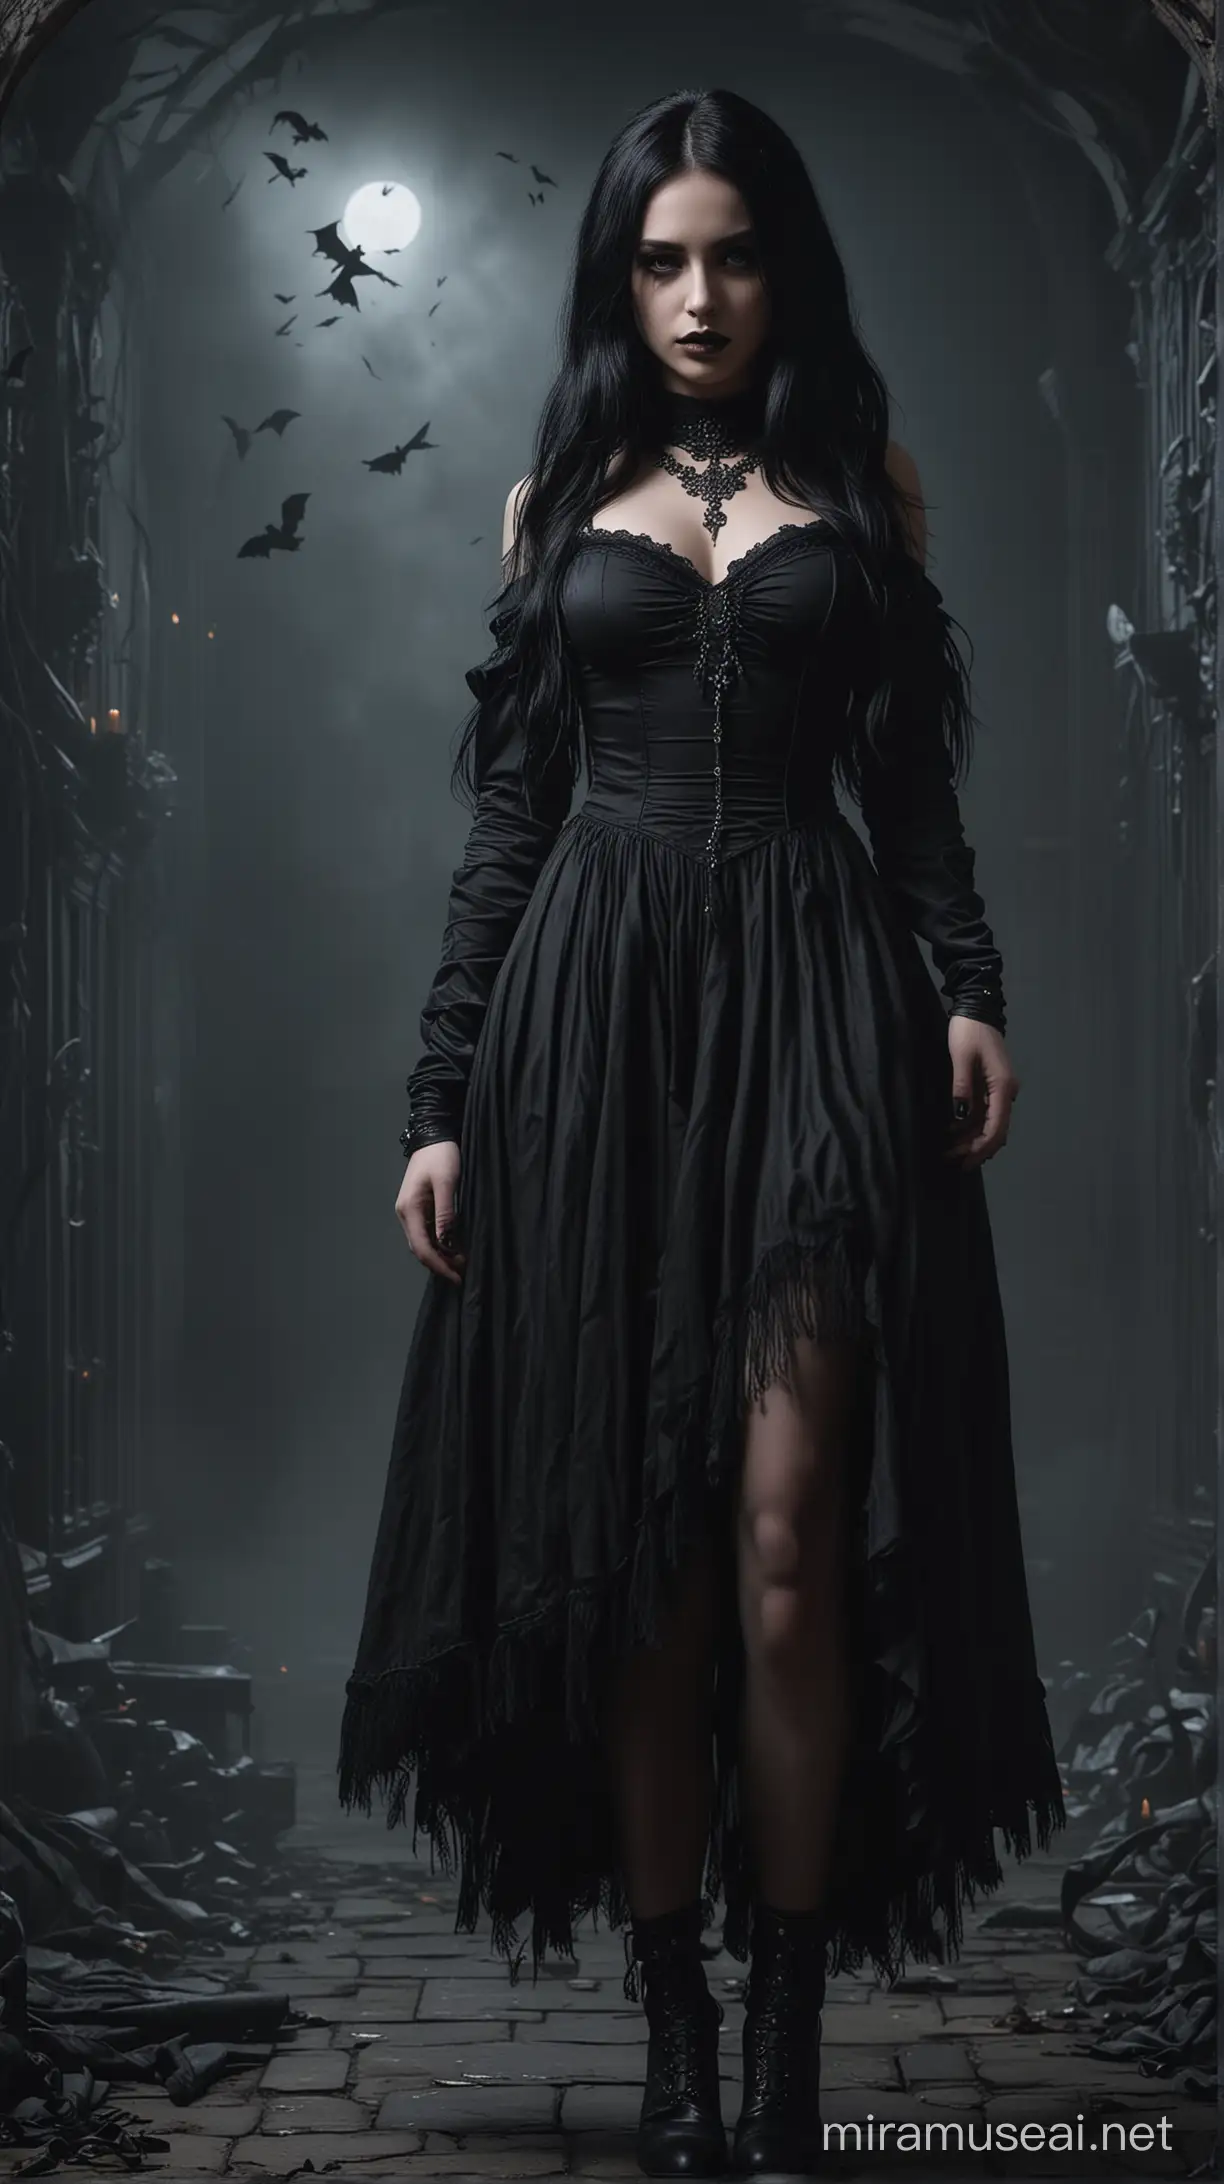 A stunning and detailed full body shot image of a gothic girl, captured from a 3/4 quarter angle. She is dressed in black, with a choker necklace and heavily made-up eyes, giving her a mystical and dark allure. Her left hand is extended towards the viewer, revealing intricate details and a sharp focus on her delicate features. Her long, flowing black hair dances in the air, adding to the dark and enigmatic atmosphere. The background depicts a haunted mansion, with fine textures and a cinematic feel, immersing the viewer into the dark fantasy world., cinematic, dark fantasy